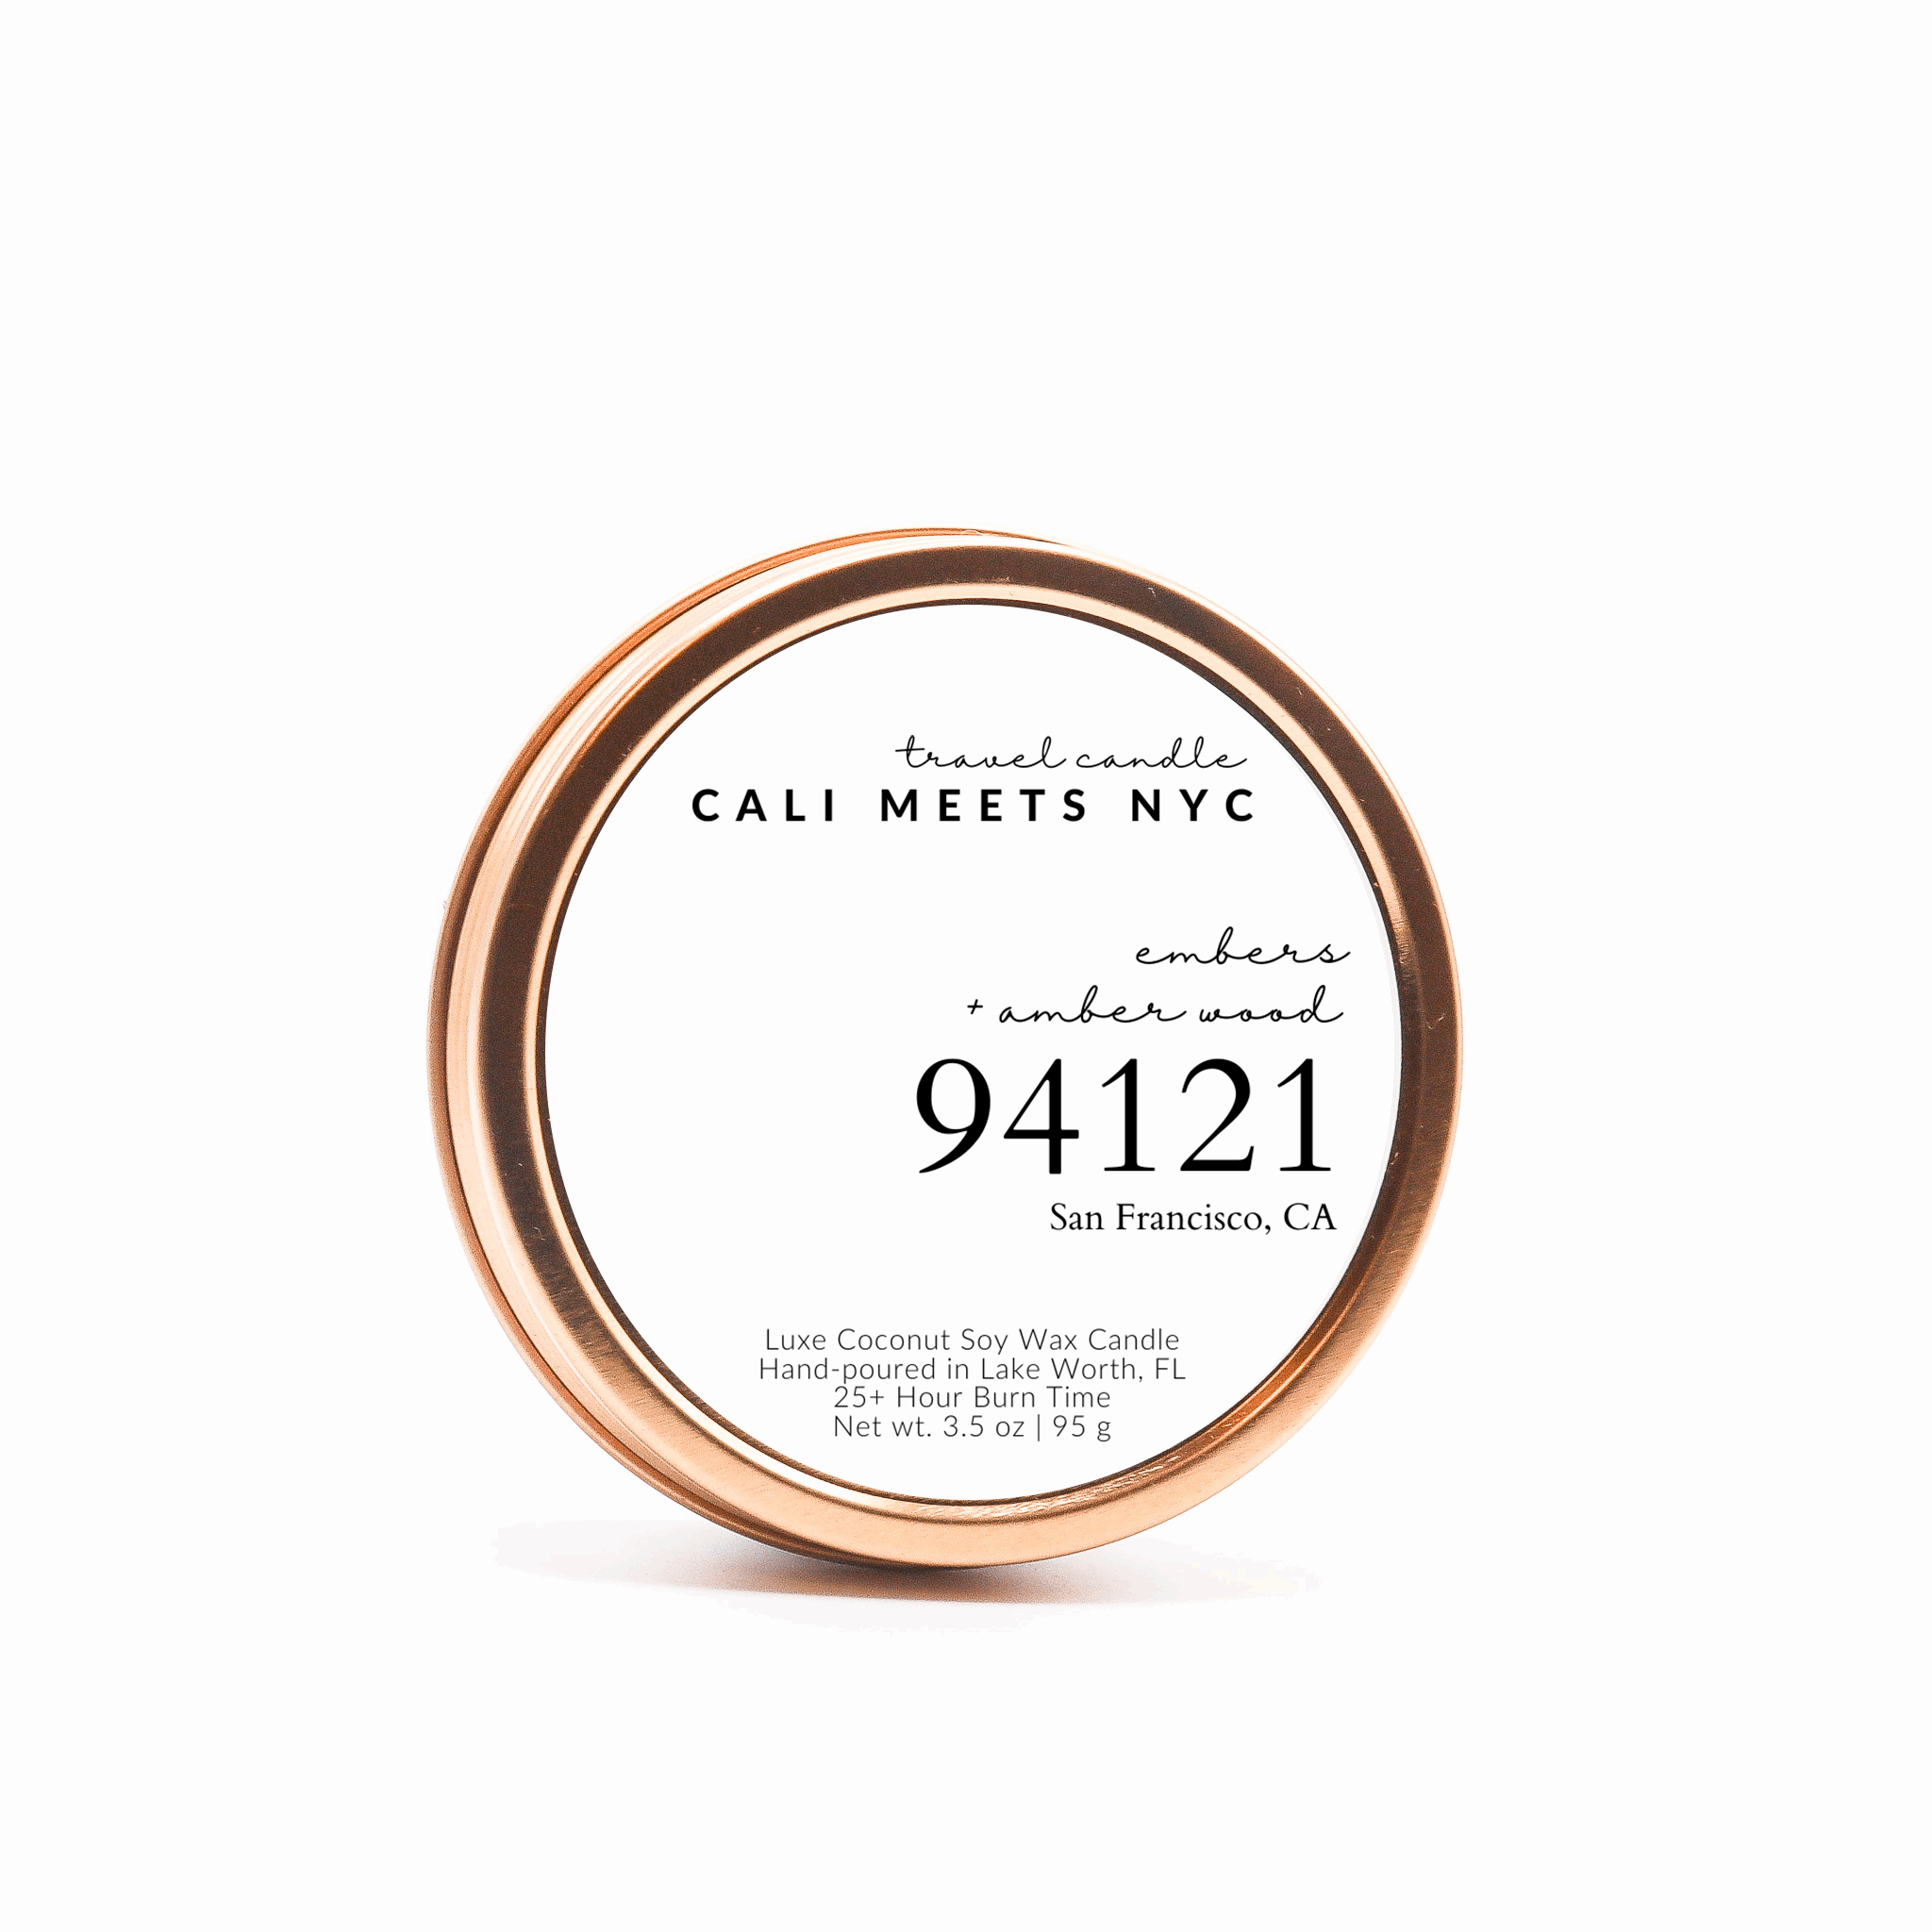 94121, Embers + Amber Wood Coconut Soy Candle Tin